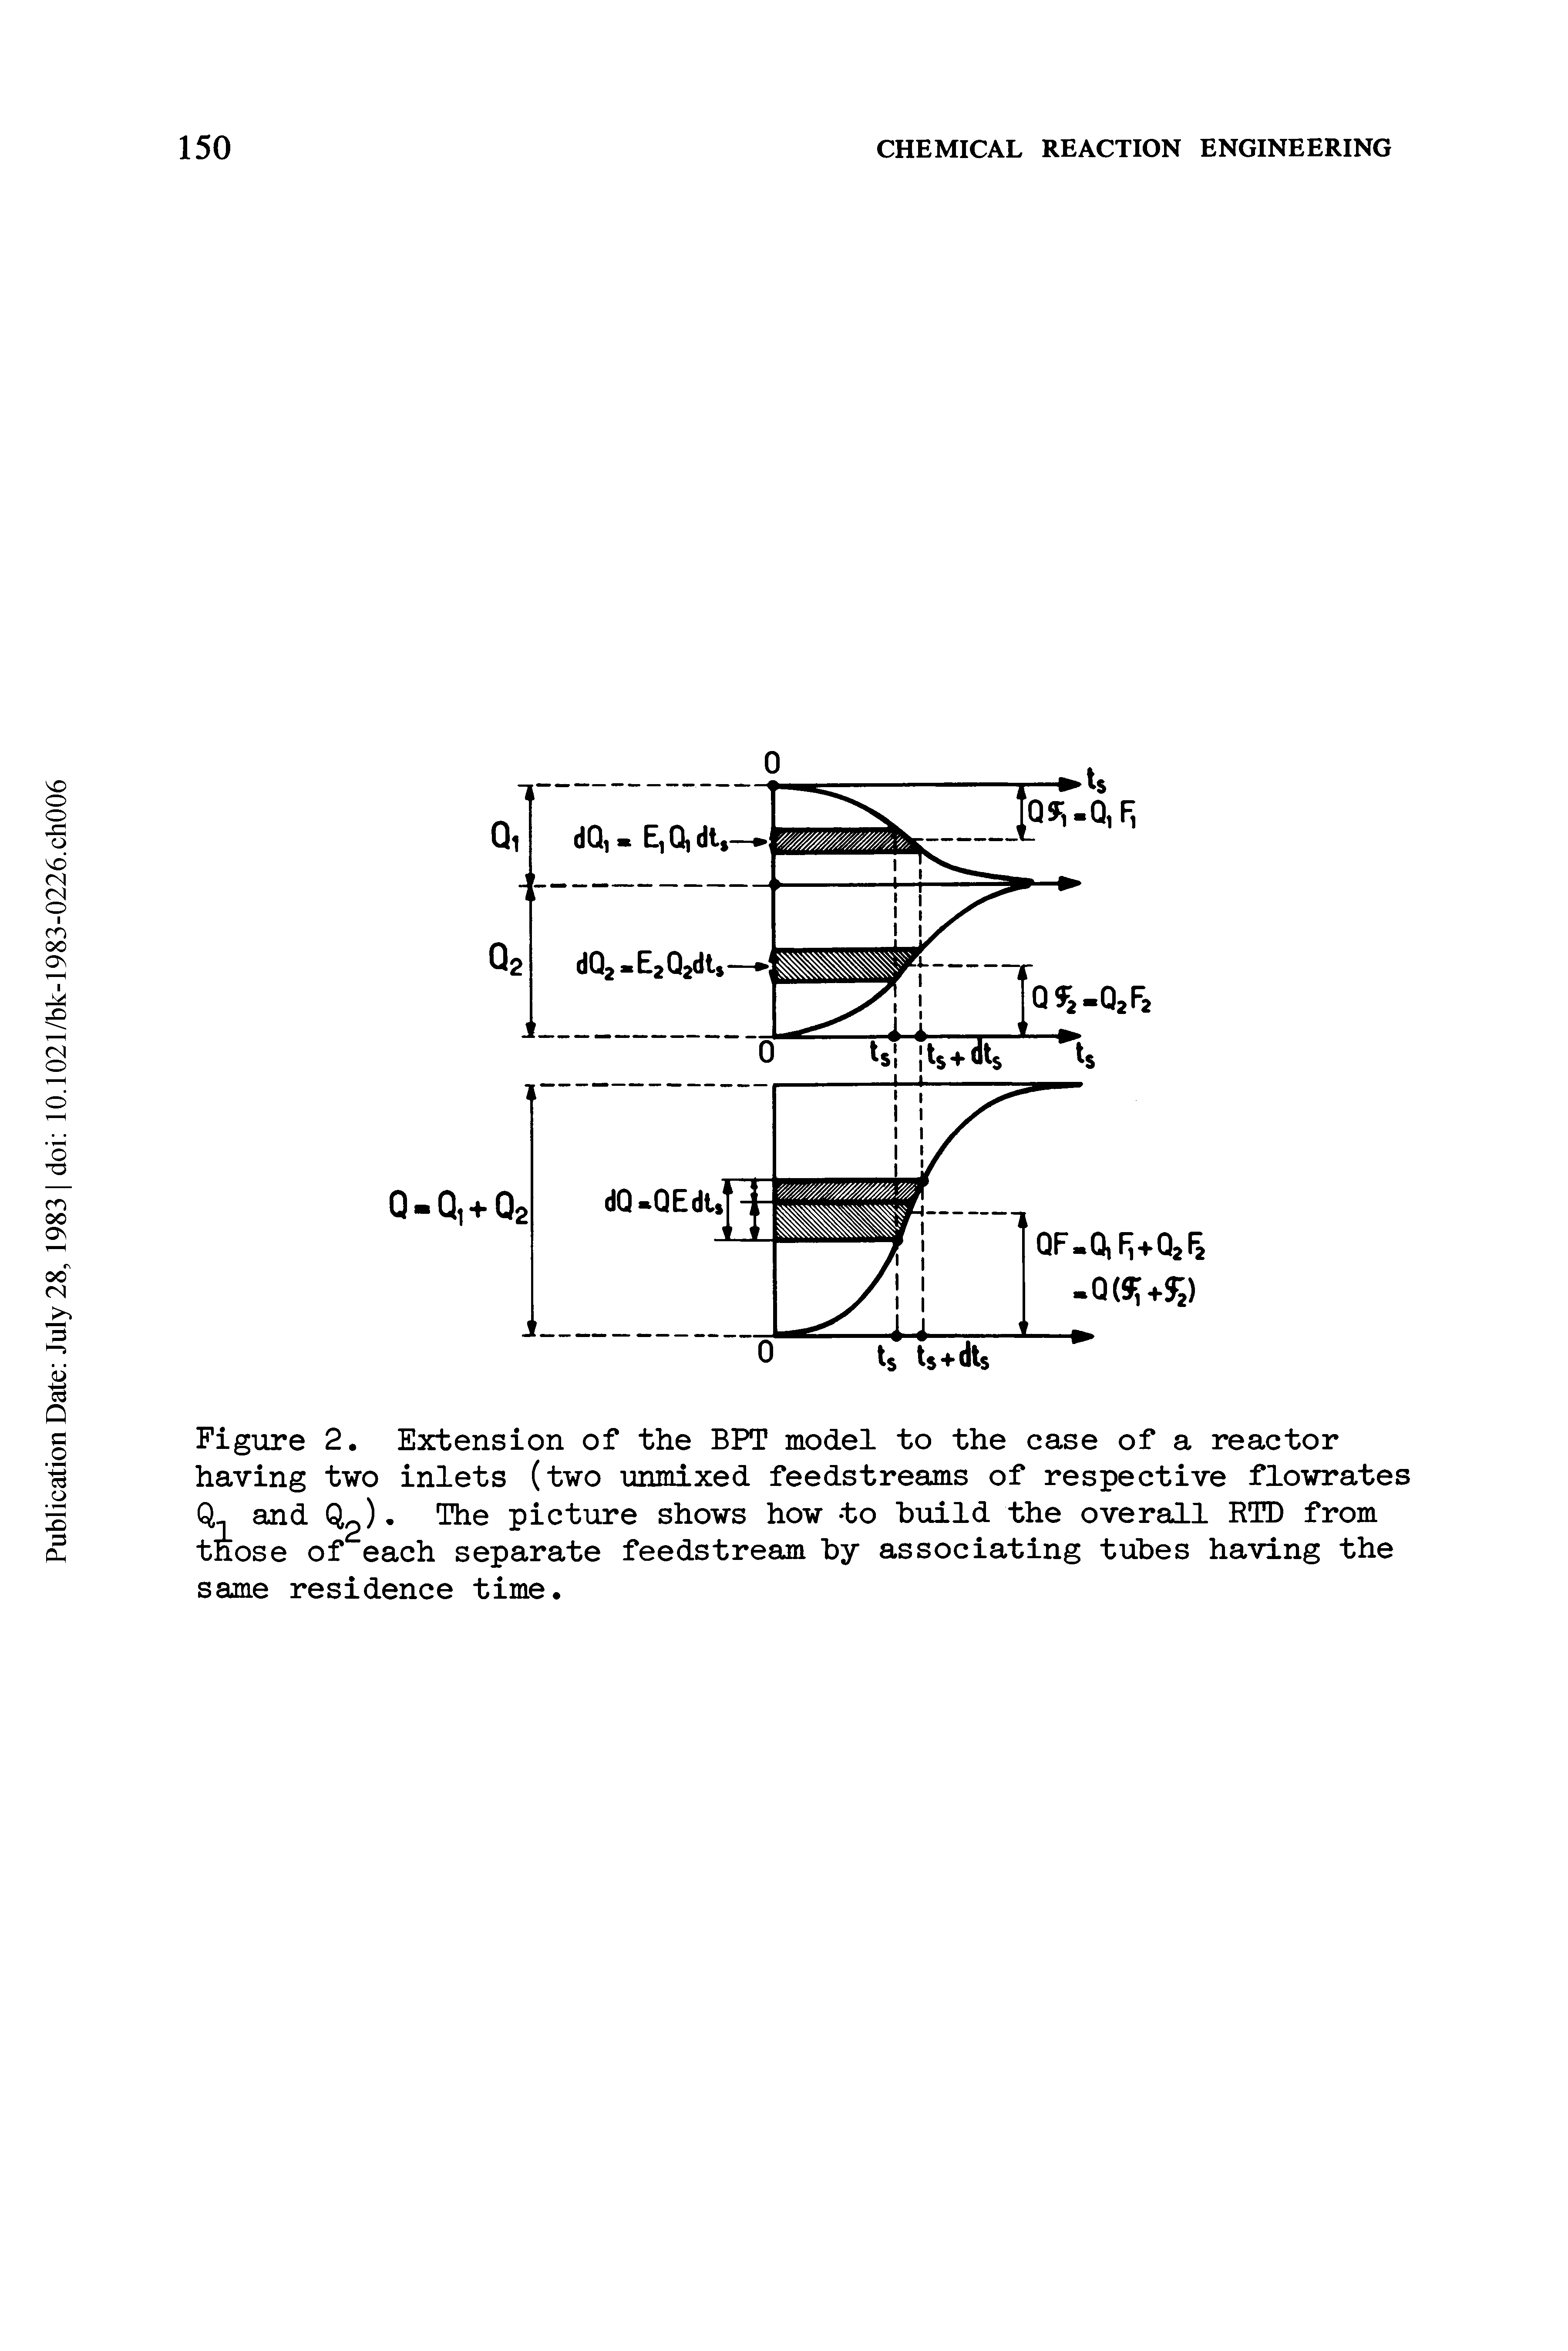 Figure 2. Extension of the BPT model to the case of a reactor having two inlets (two unmixed feedstreams of respective flowrates Q, and C ). The picture shows how to build the overall RTD from those of each separate feedstream by associating tubes having the same residence time.